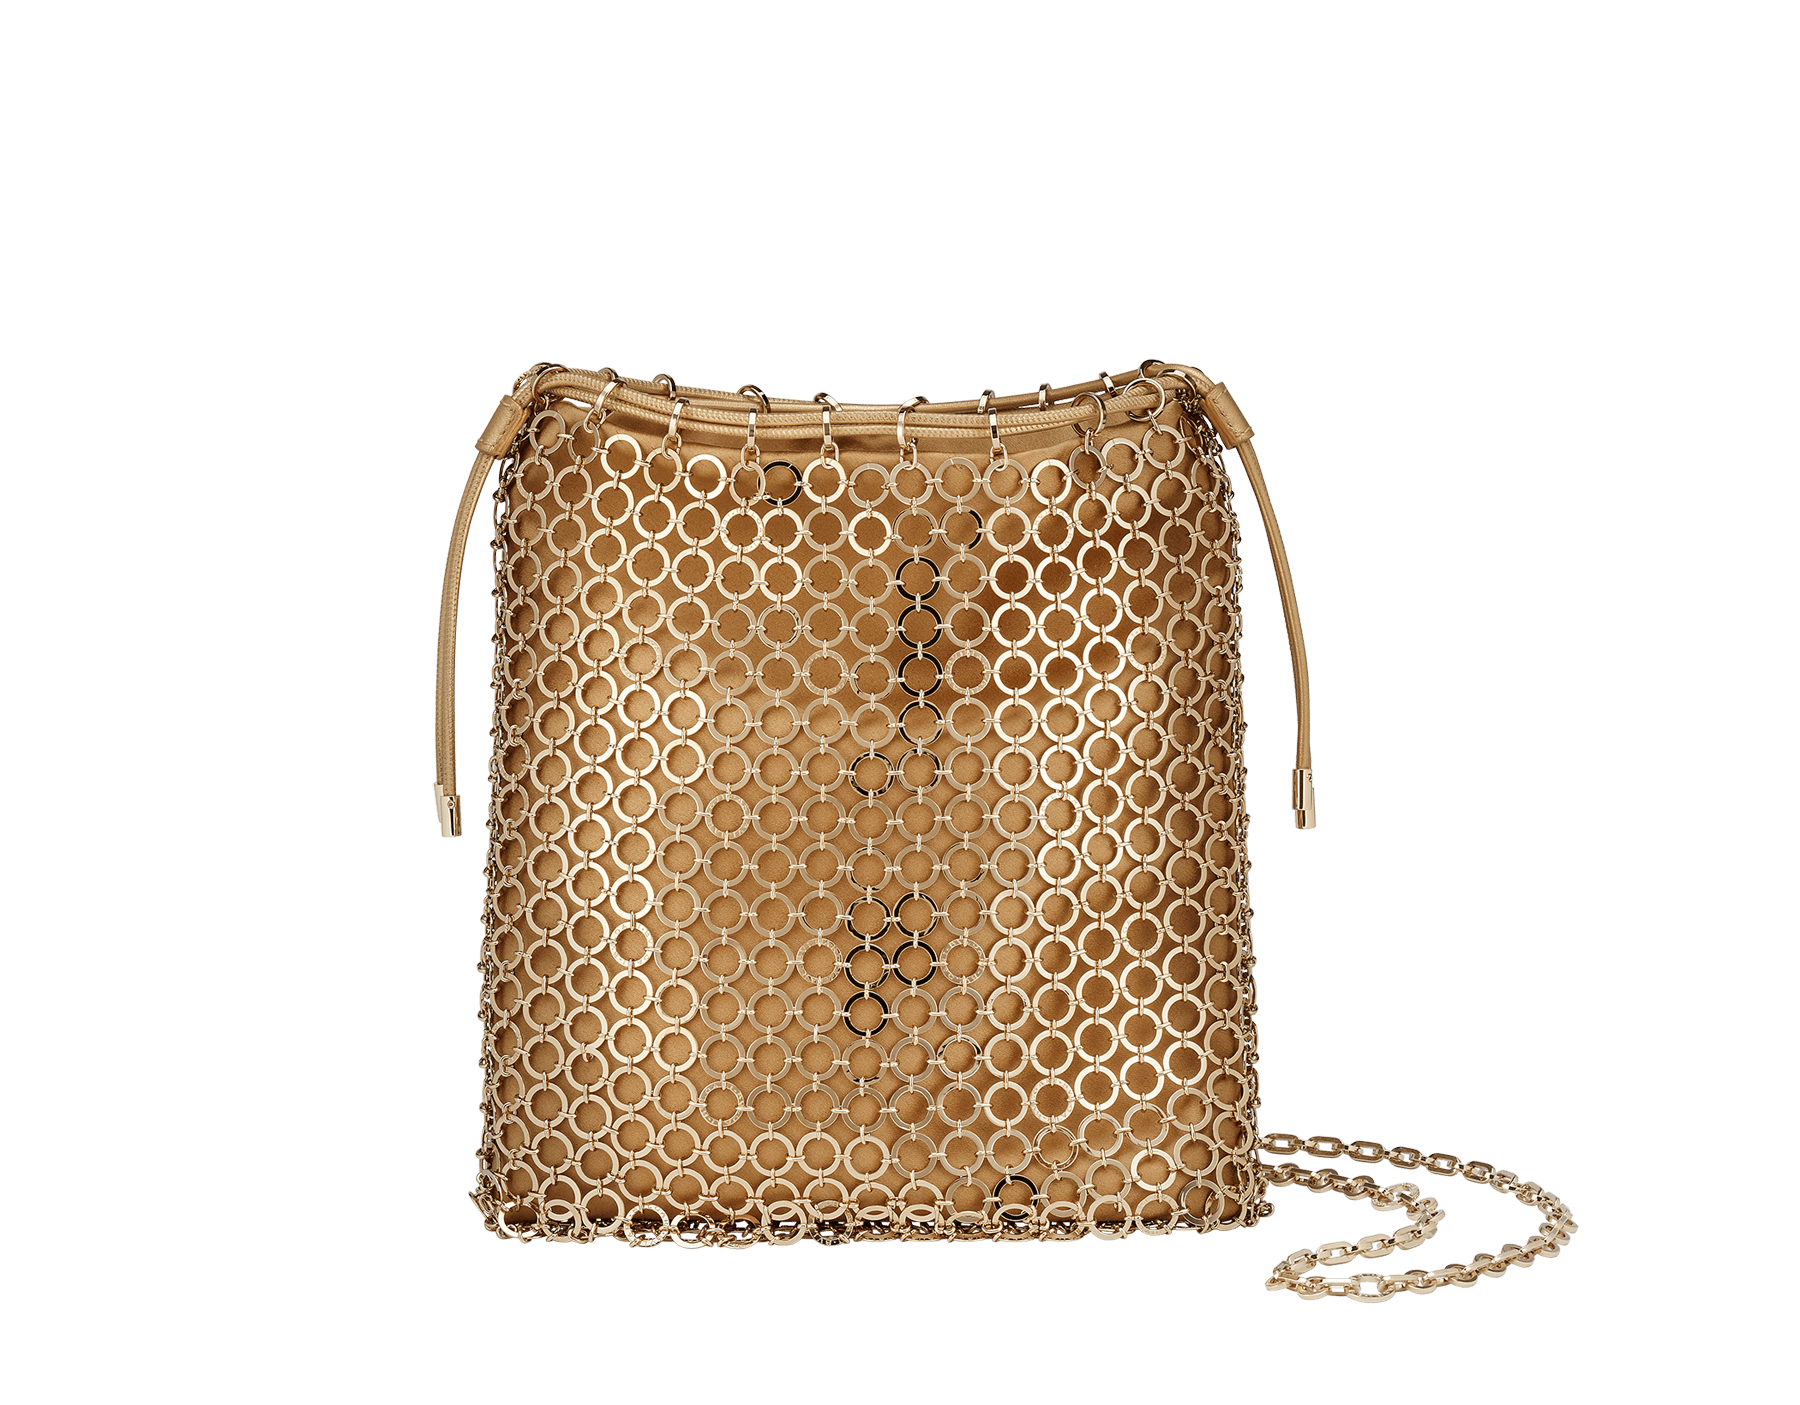 Bulgari Cocktail clutch with light gold-plated brass heritage mesh and light gold satin inner layer. 291695 image 1